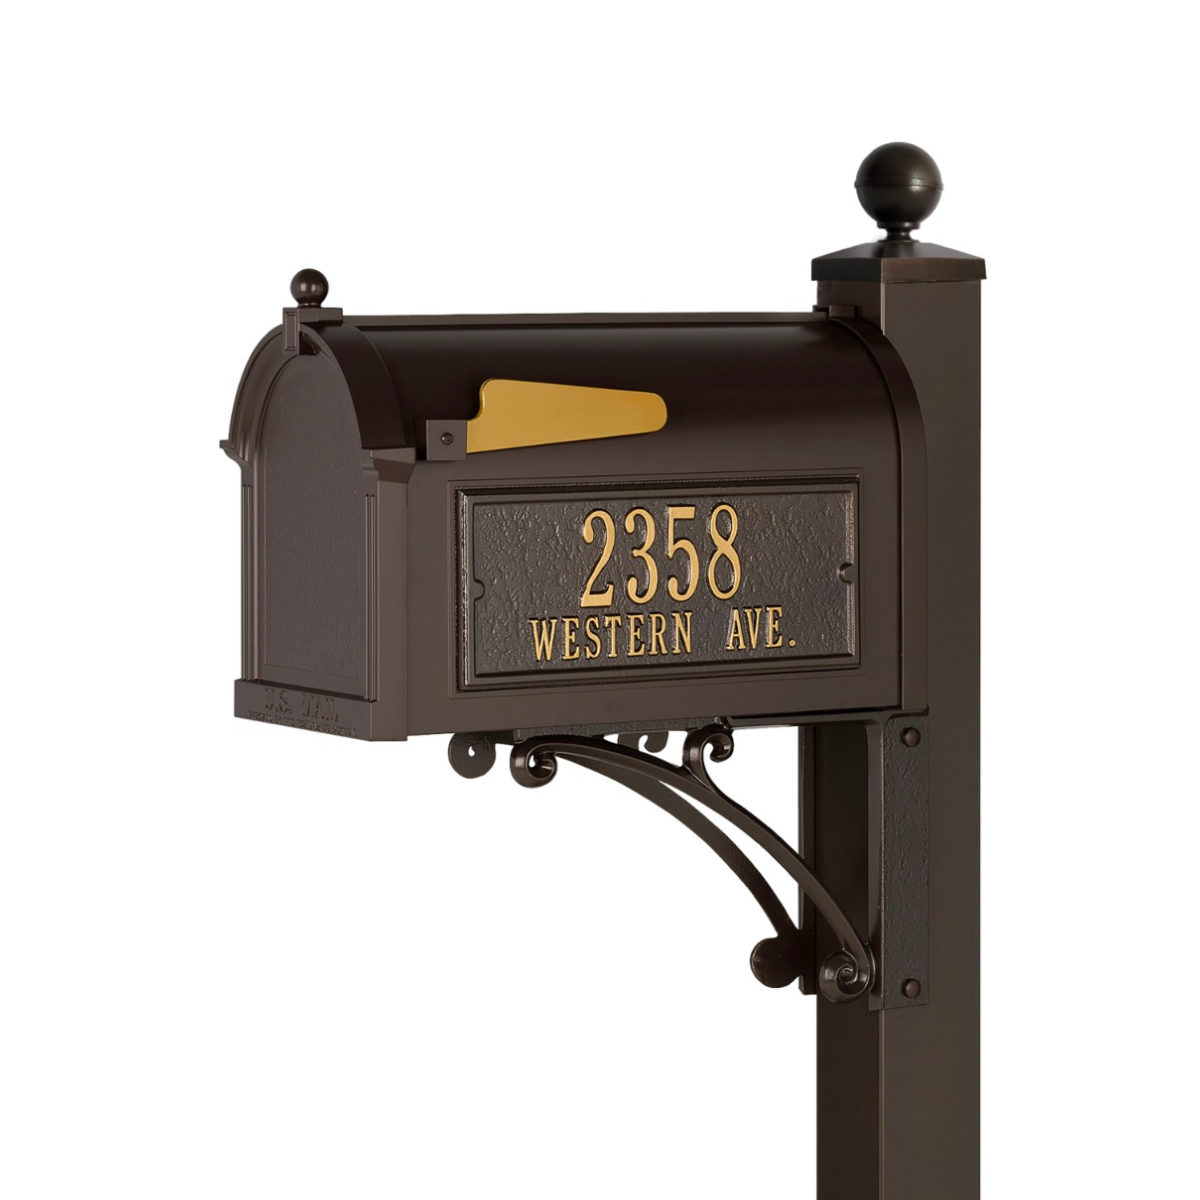 Whitehall Custom Capitol Mailbox and Post Package for Sale (Optional Post & Accessories) Product Image